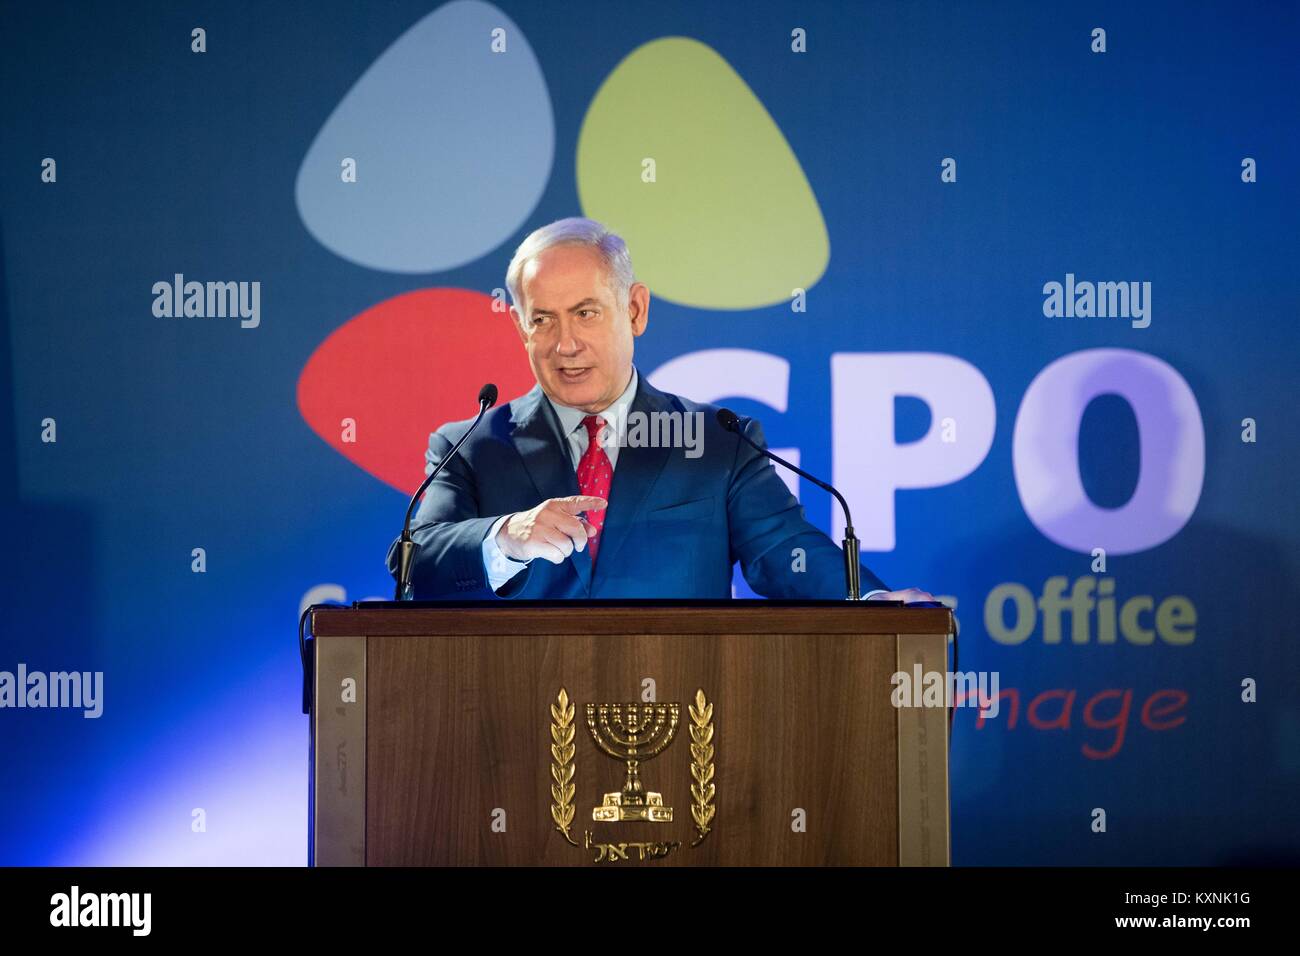 Jerusalem. 10th Jan, 2018. Israeli Prime Minister Benjamin Netanyahu speaks at the annual Government Press Office (GPO) New Year's toast for foreign journalists in Jerusalem, on Jan. 10, 2018. Credit: JINI/Xinhua/Alamy Live News Stock Photo